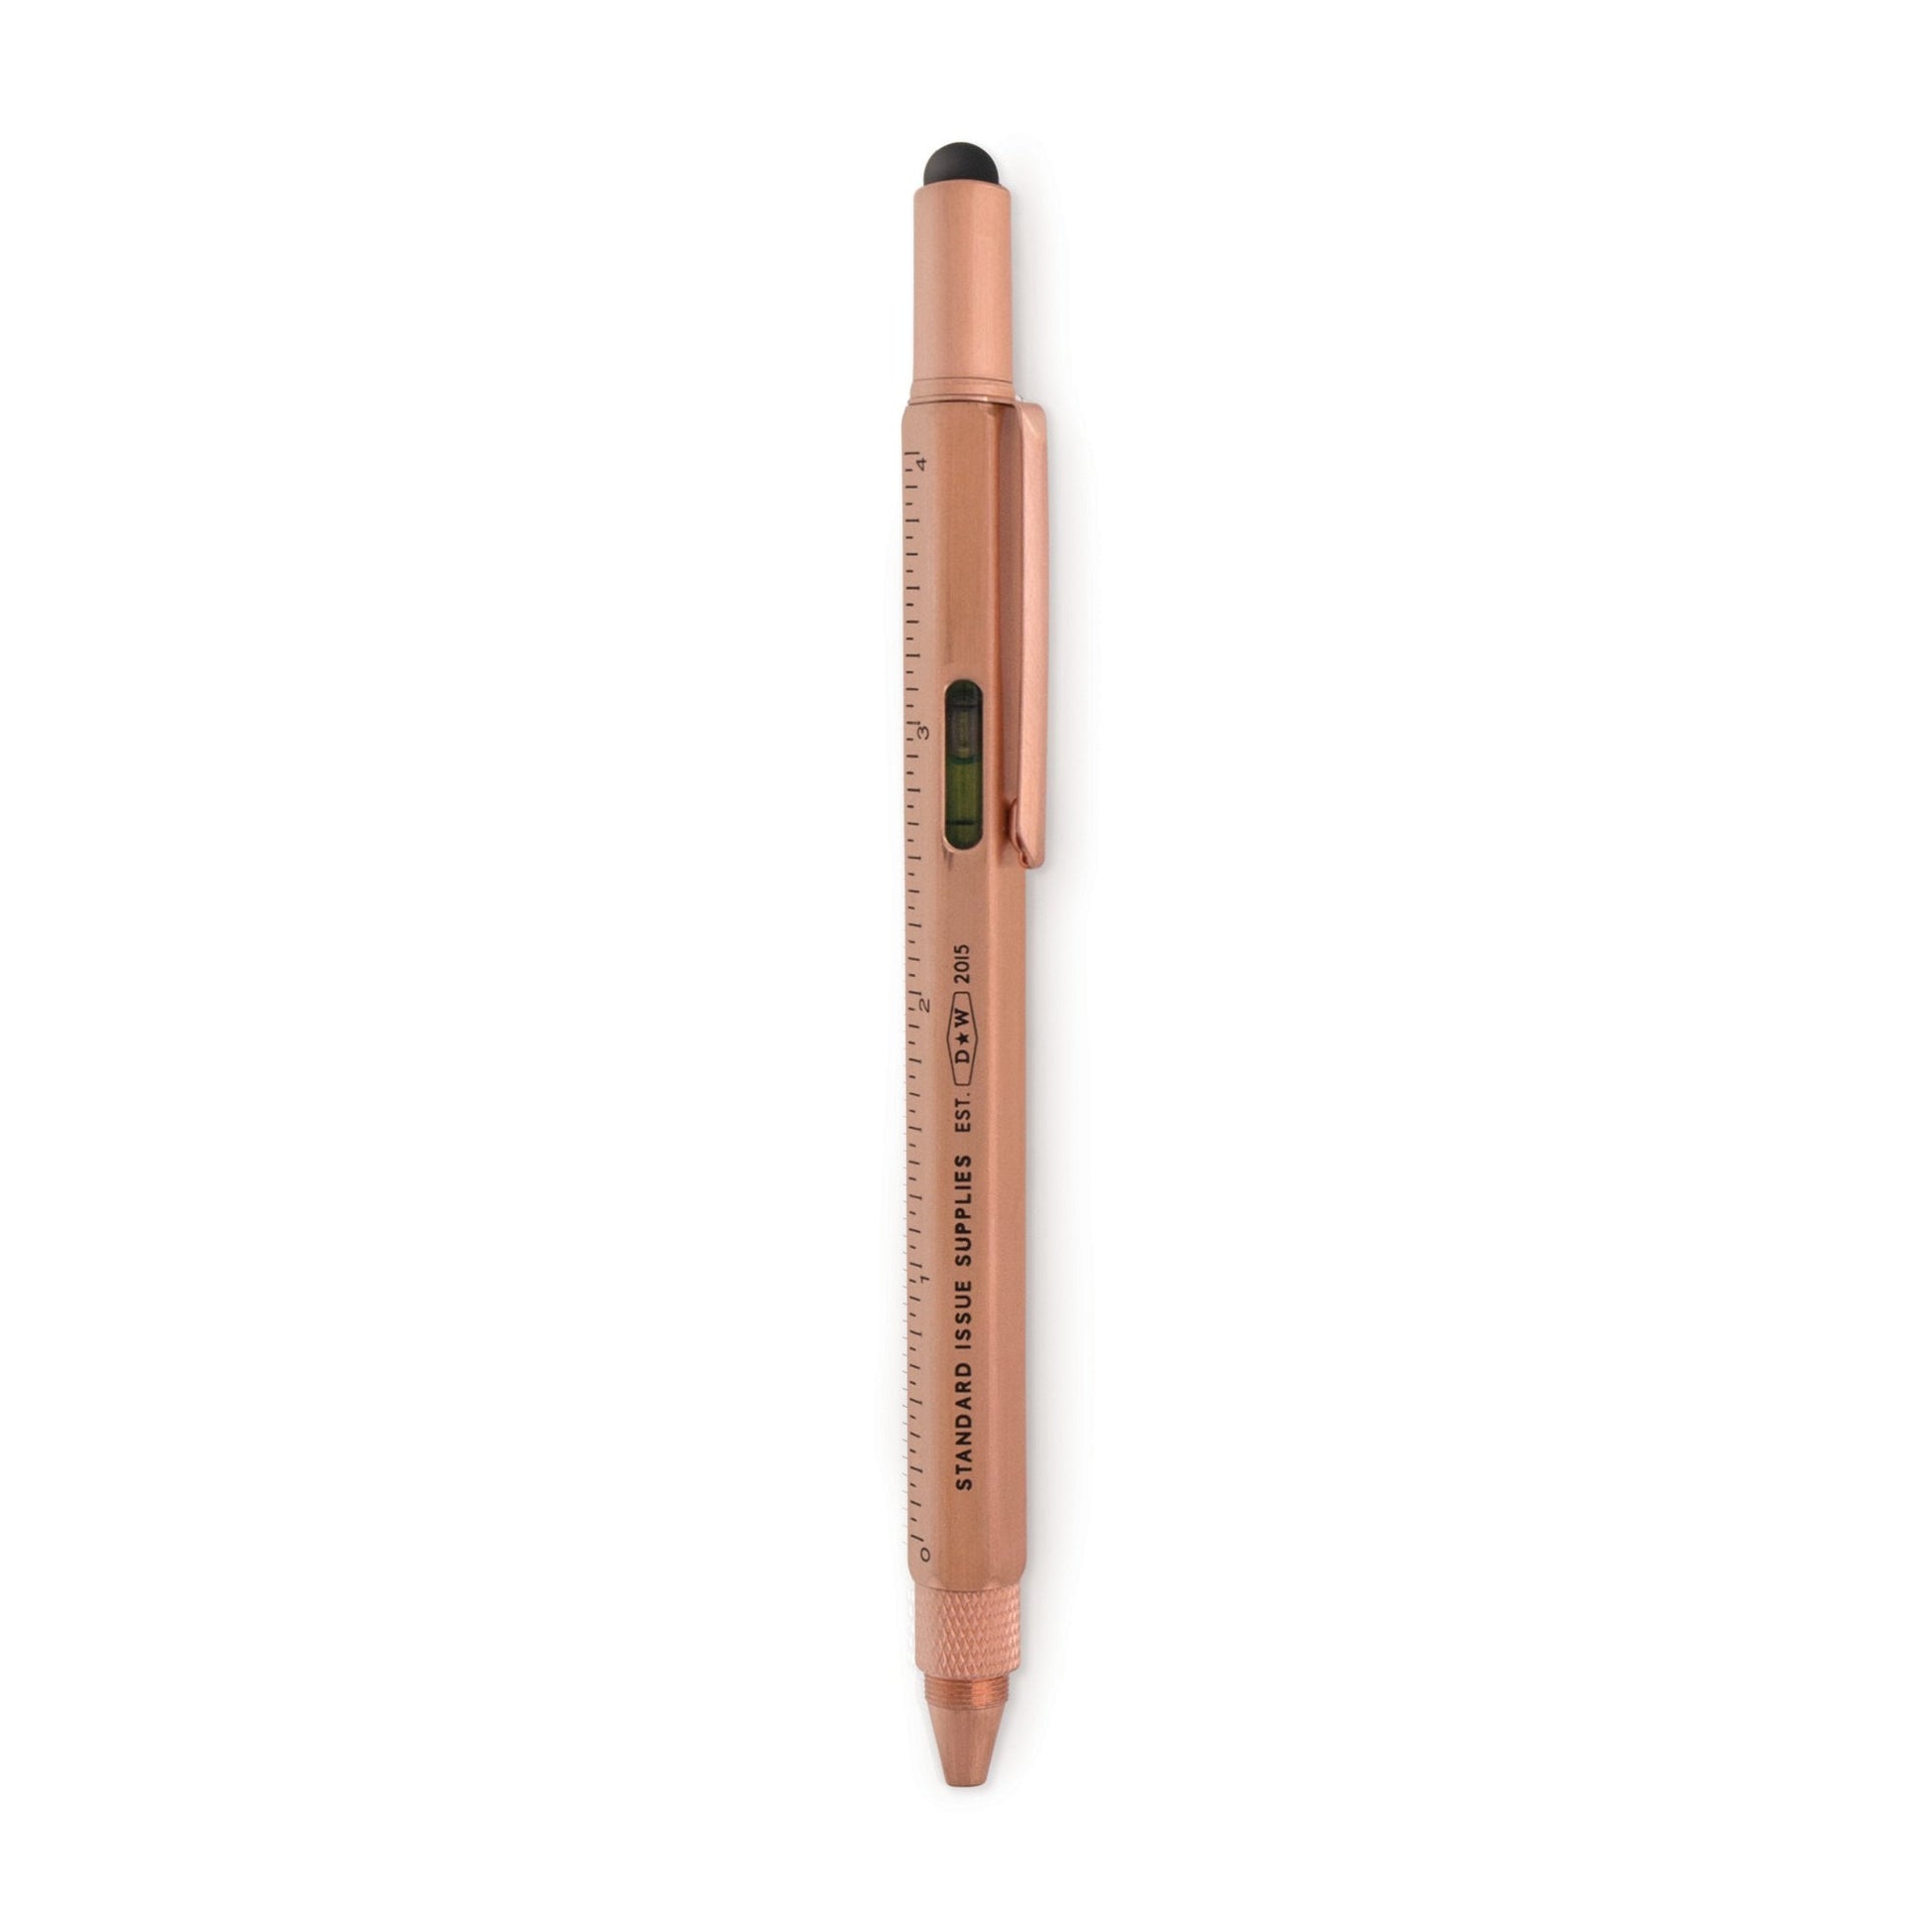 Copper tool multi function tool pen from the Pencil Me In stationery shop